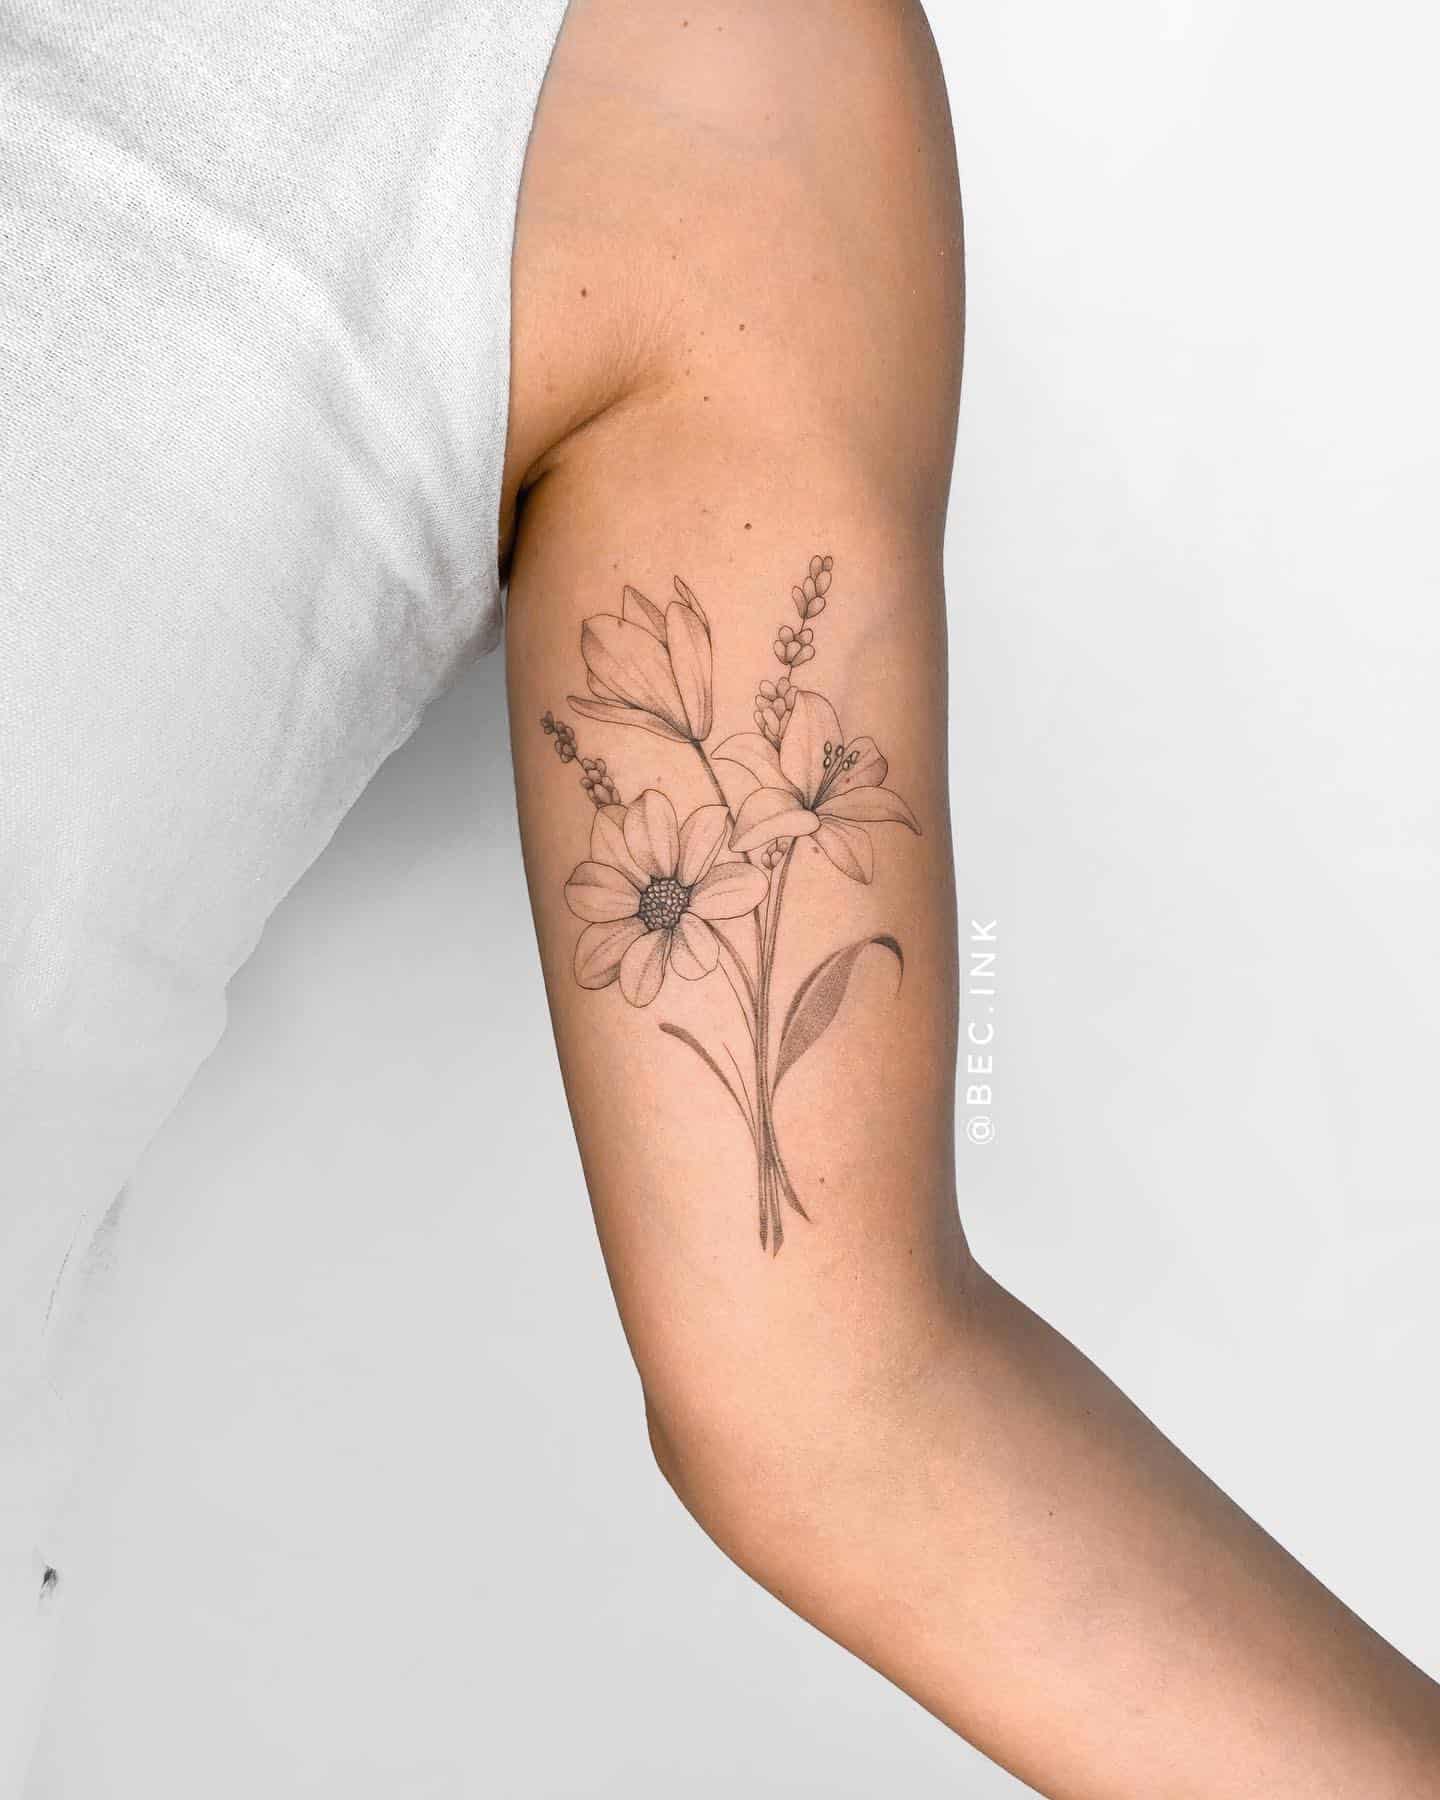 Hand poked fine line flower tattoo located on the side